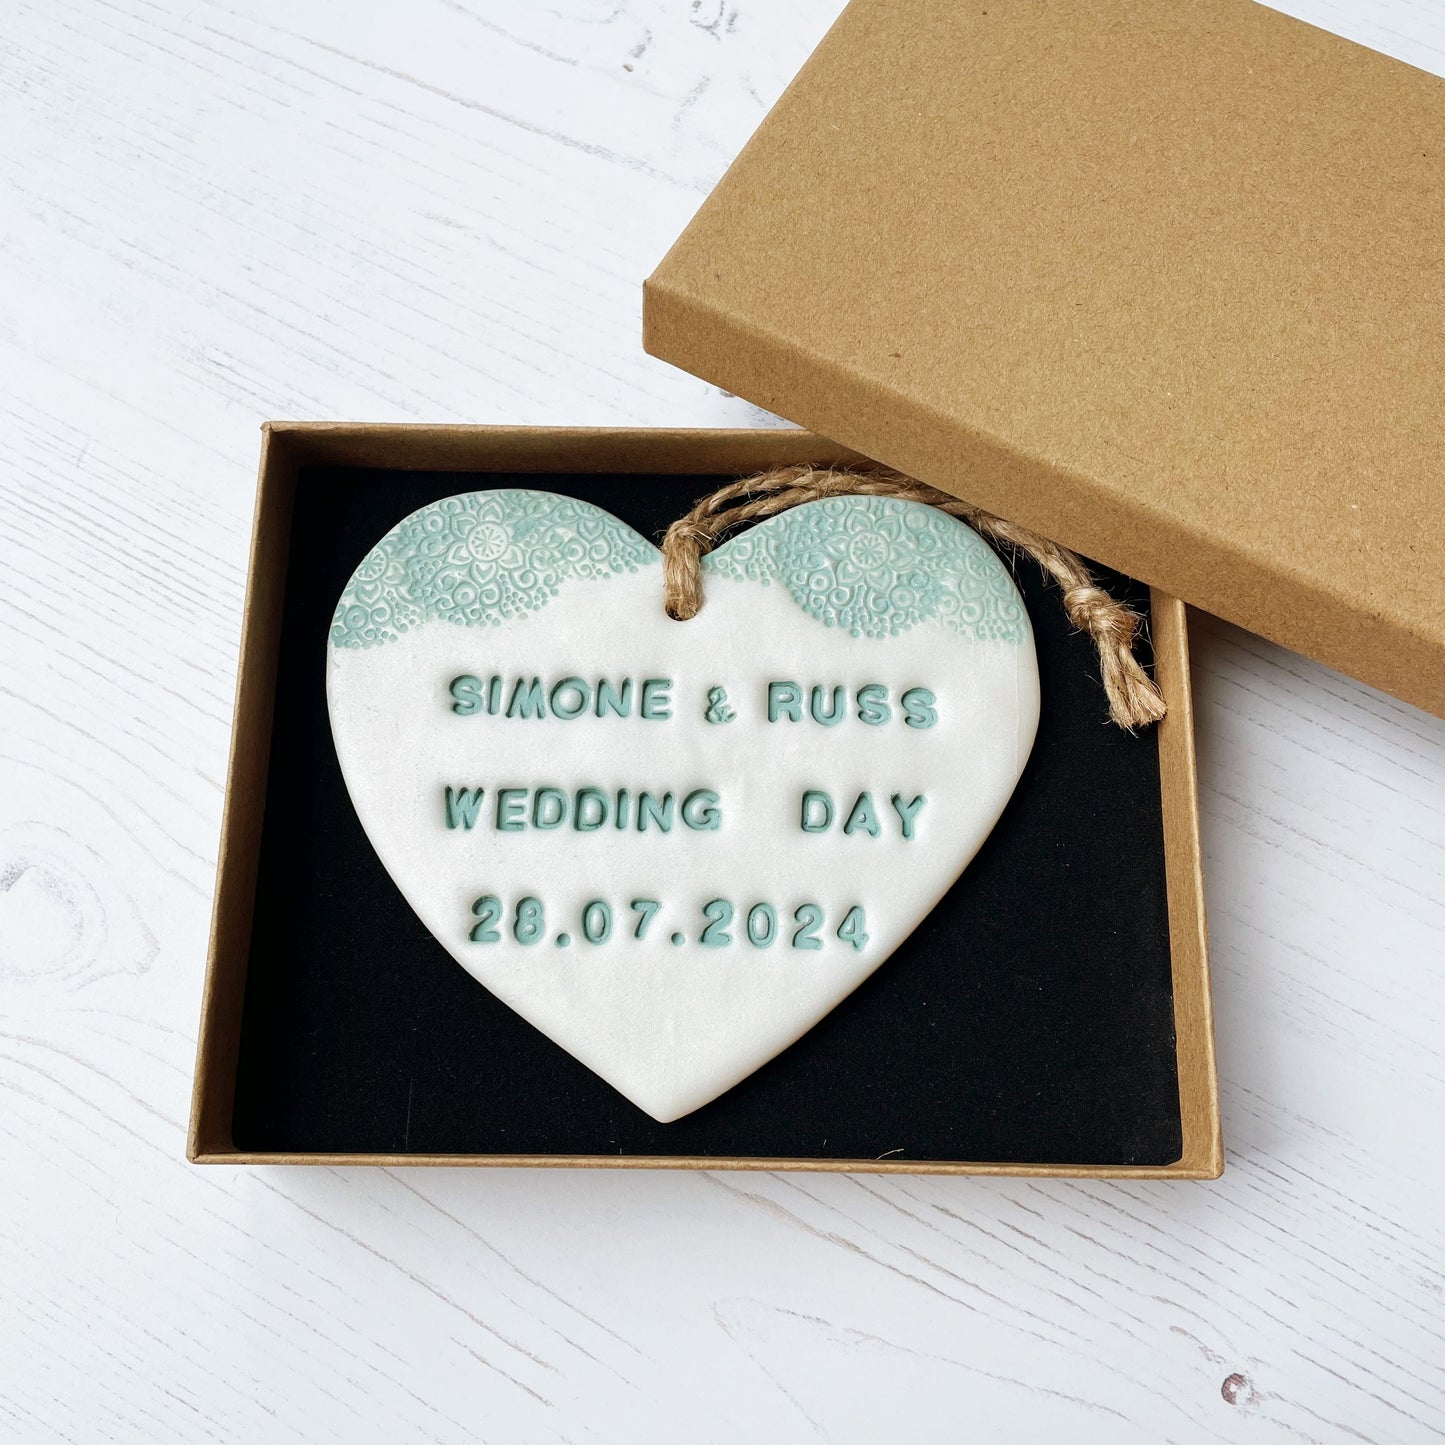 Personalised wedding gift, pearlised white clay heart with a sage green lace edge at the top of the heart with twine to hang, the heart is personalised with SIMONE & RUSS WEDDING DAY 28.07.2024 In a Kraft brown luxury gift box